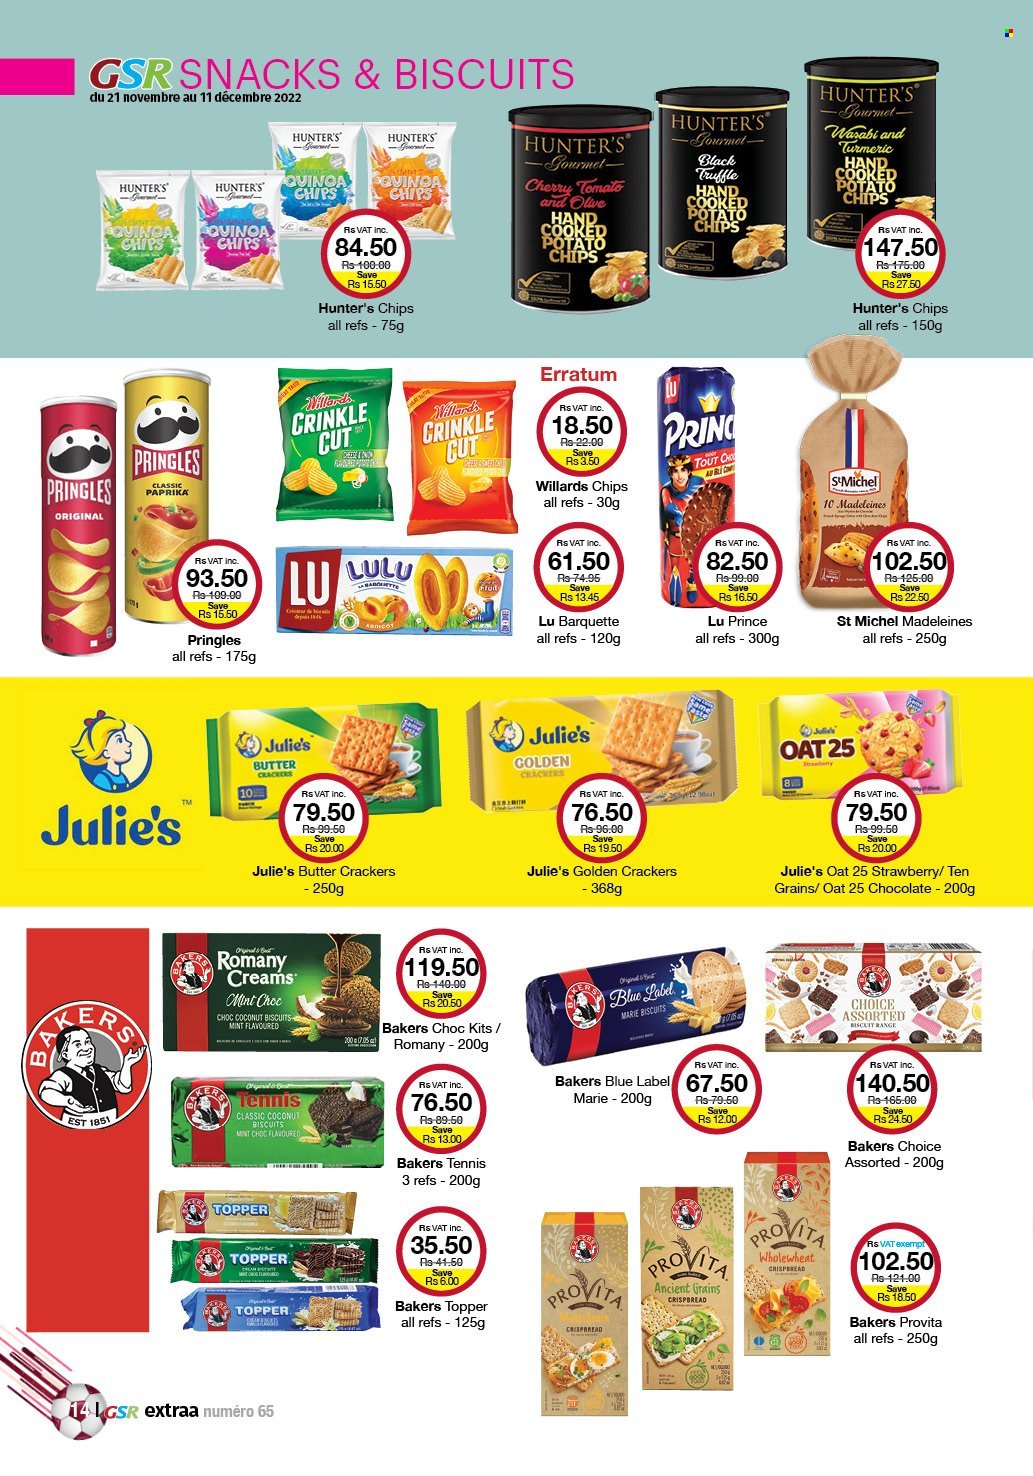 thumbnail - GSR Catalogue - 21.11.2022 - 11.12.2022 - Sales products - crispbread, cherries, butter, chocolate, snack, crackers, biscuit, Julie's, potato chips, Pringles, chips, oats, turmeric, Bakers, quinoa, wasabi. Page 14.